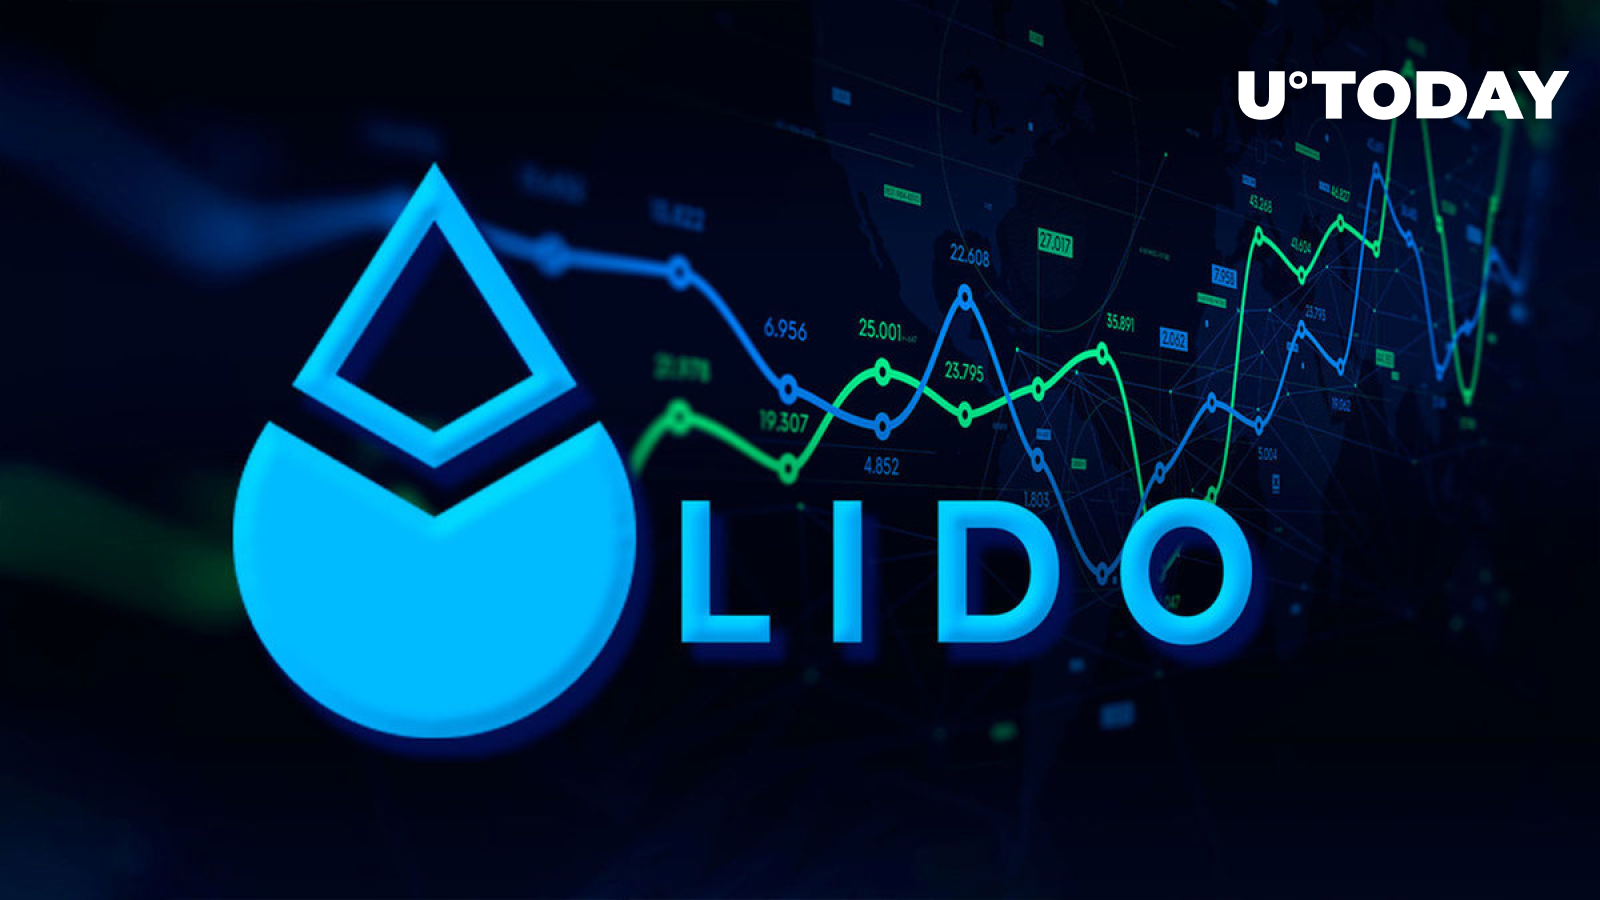 Lido Finance (LDO) Faces Large Spike in Selling Pressure, Here’s Who Sold It